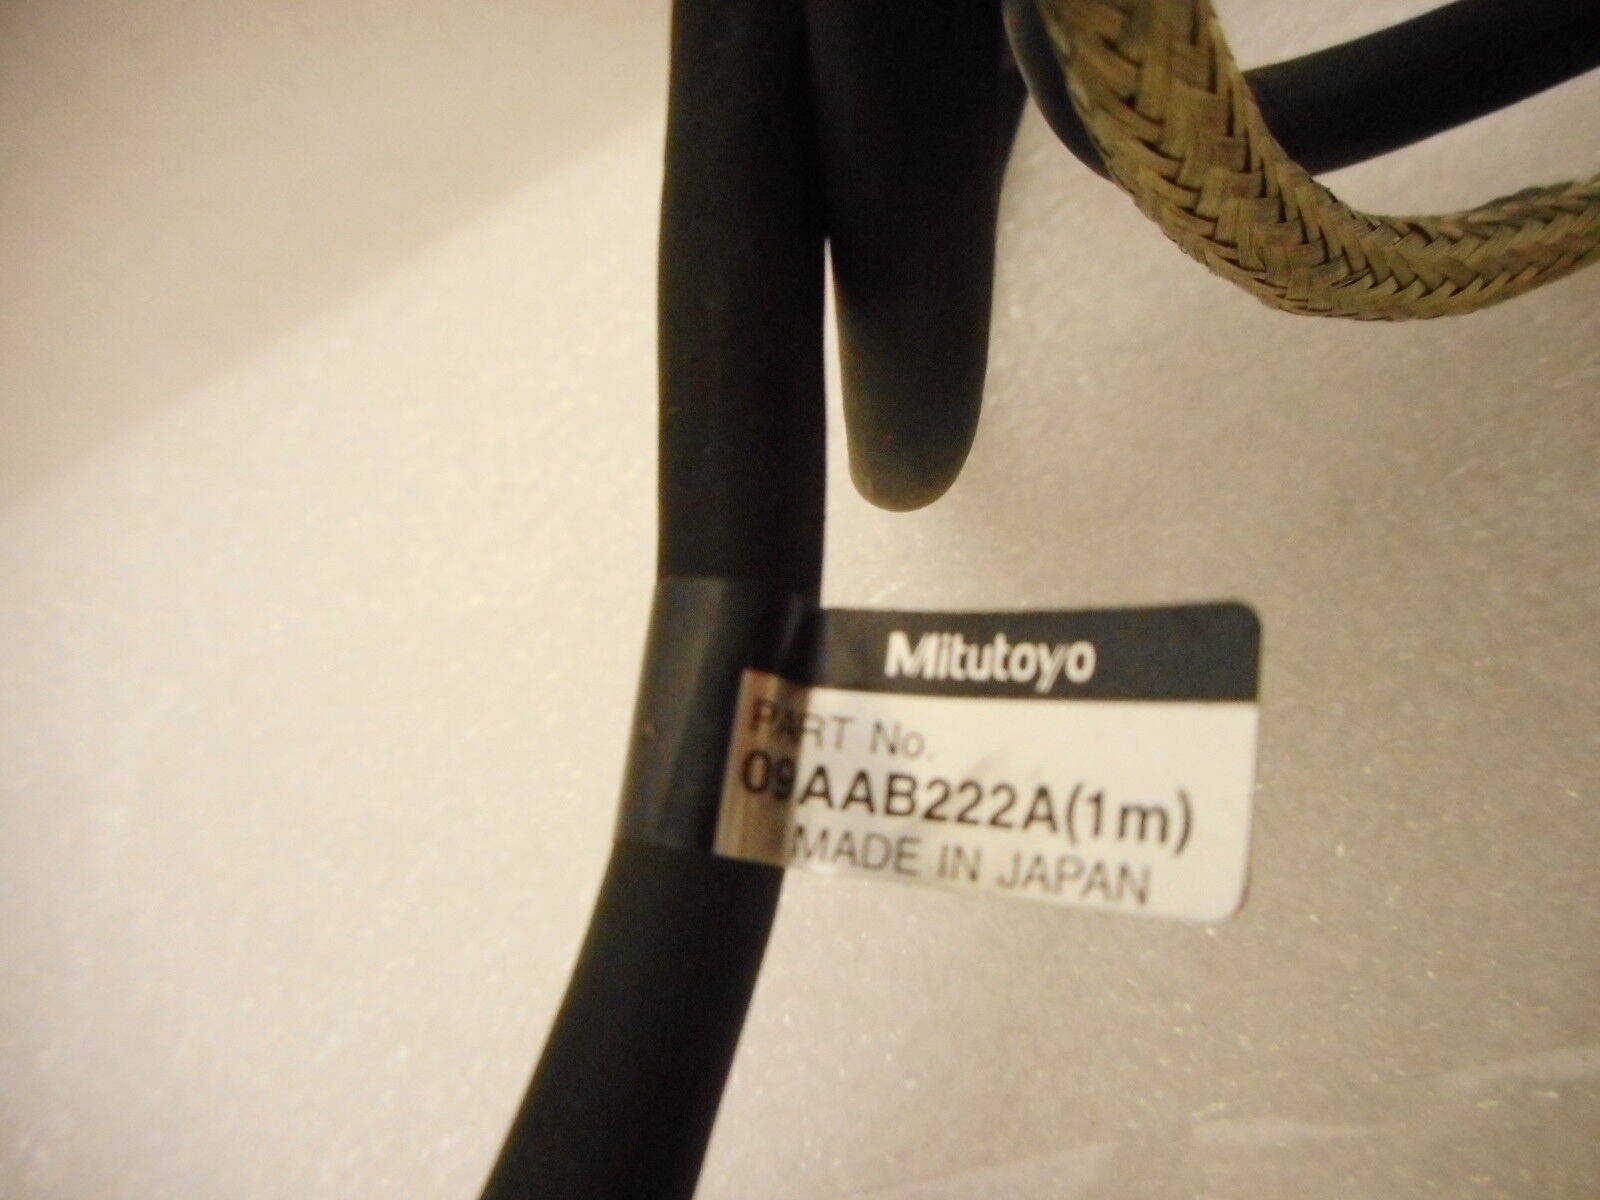 Mitutoyo 09AAB222A(1m) Linear Scale ST420 Nikon NSR-S307E DUV Scanning Used